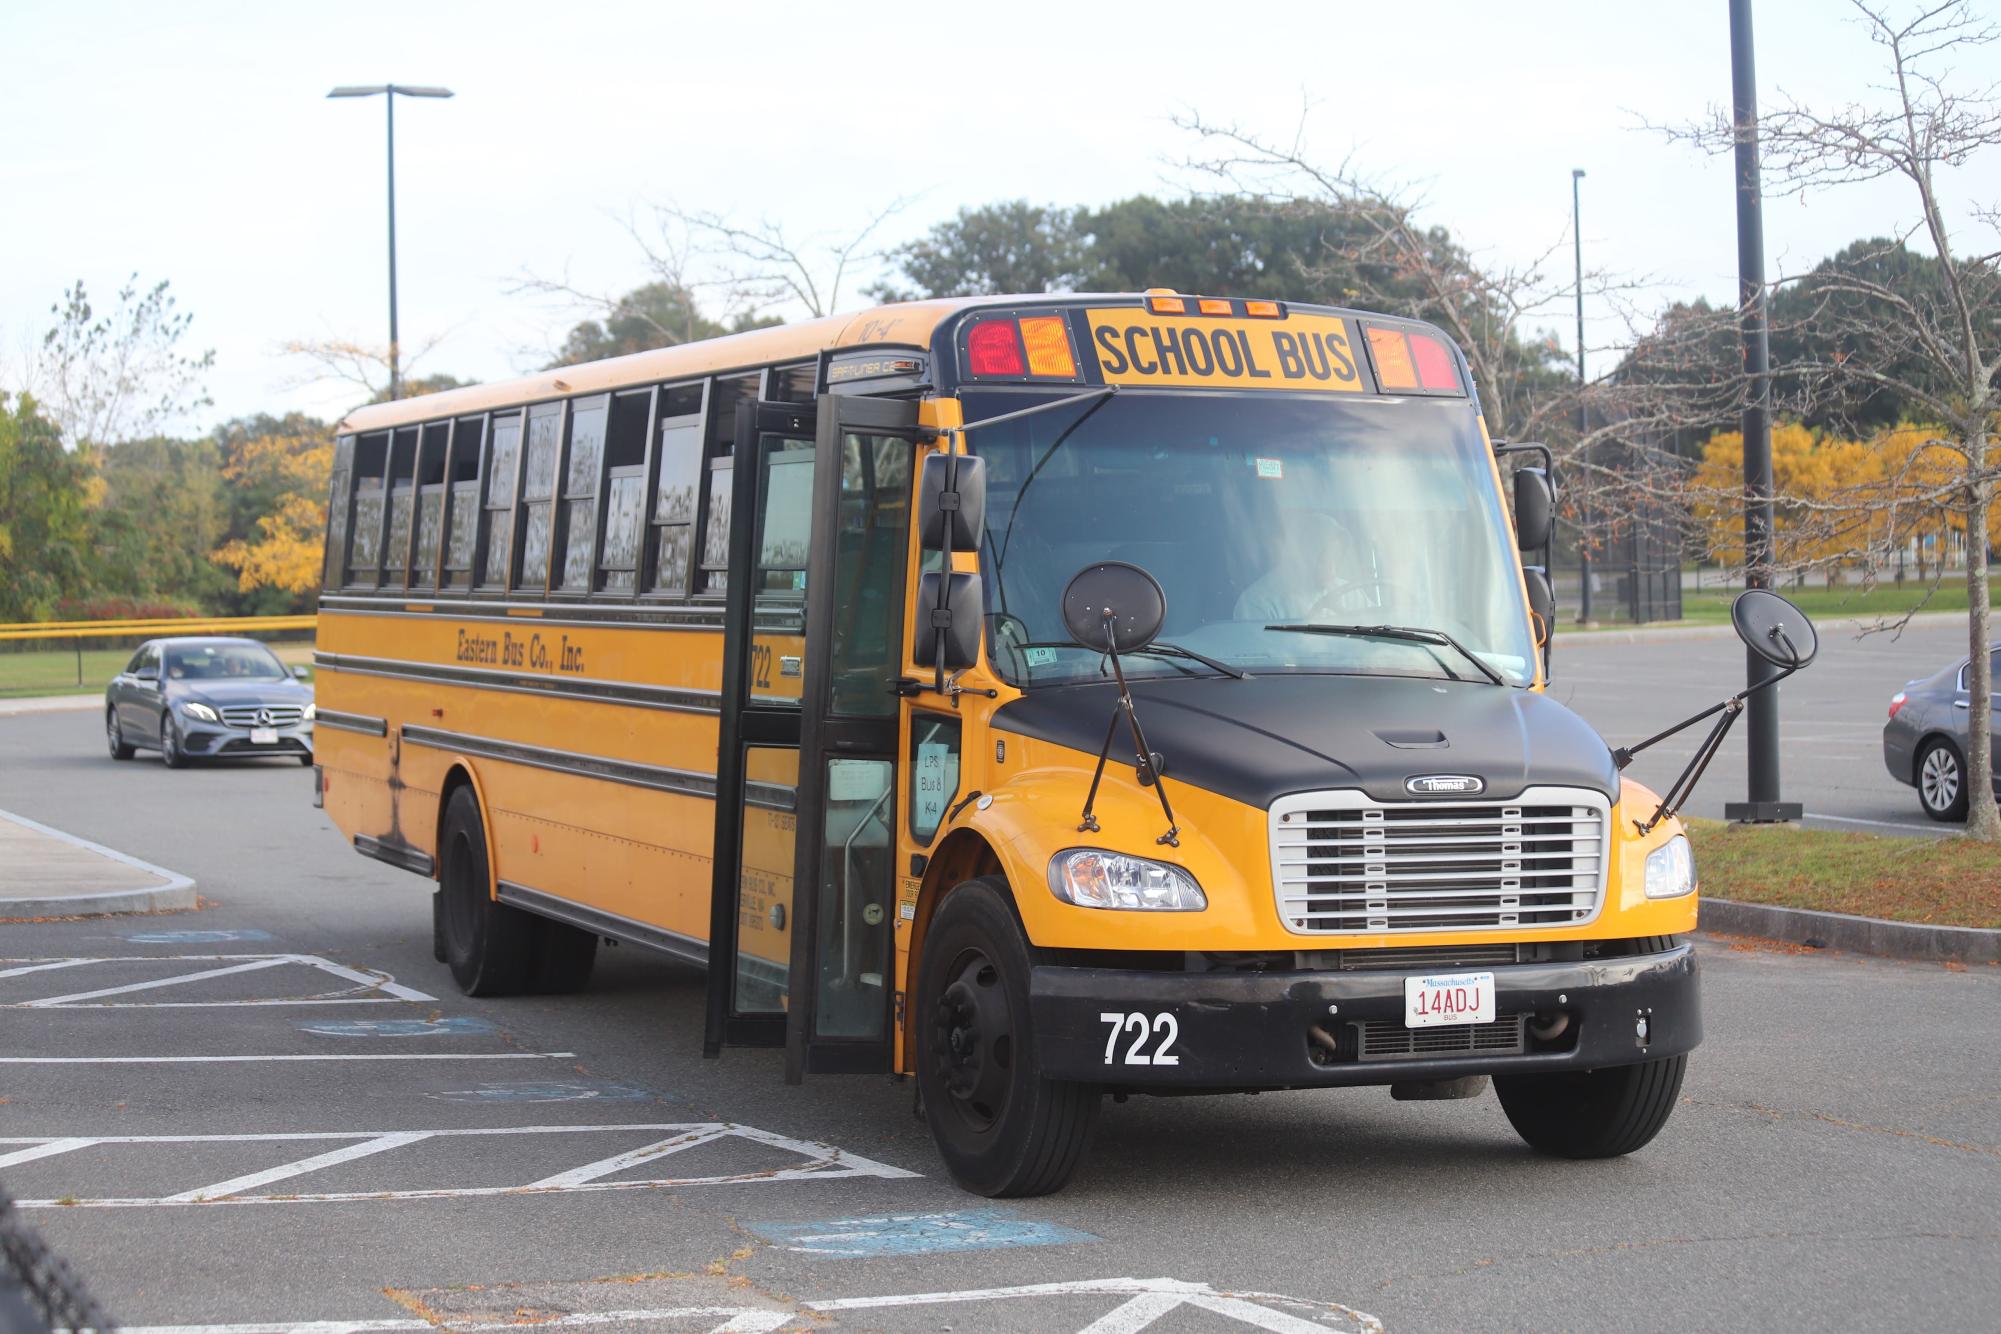 School buses across the district face heavy delays, tracker errors, and an uncooperative bureaucracy.